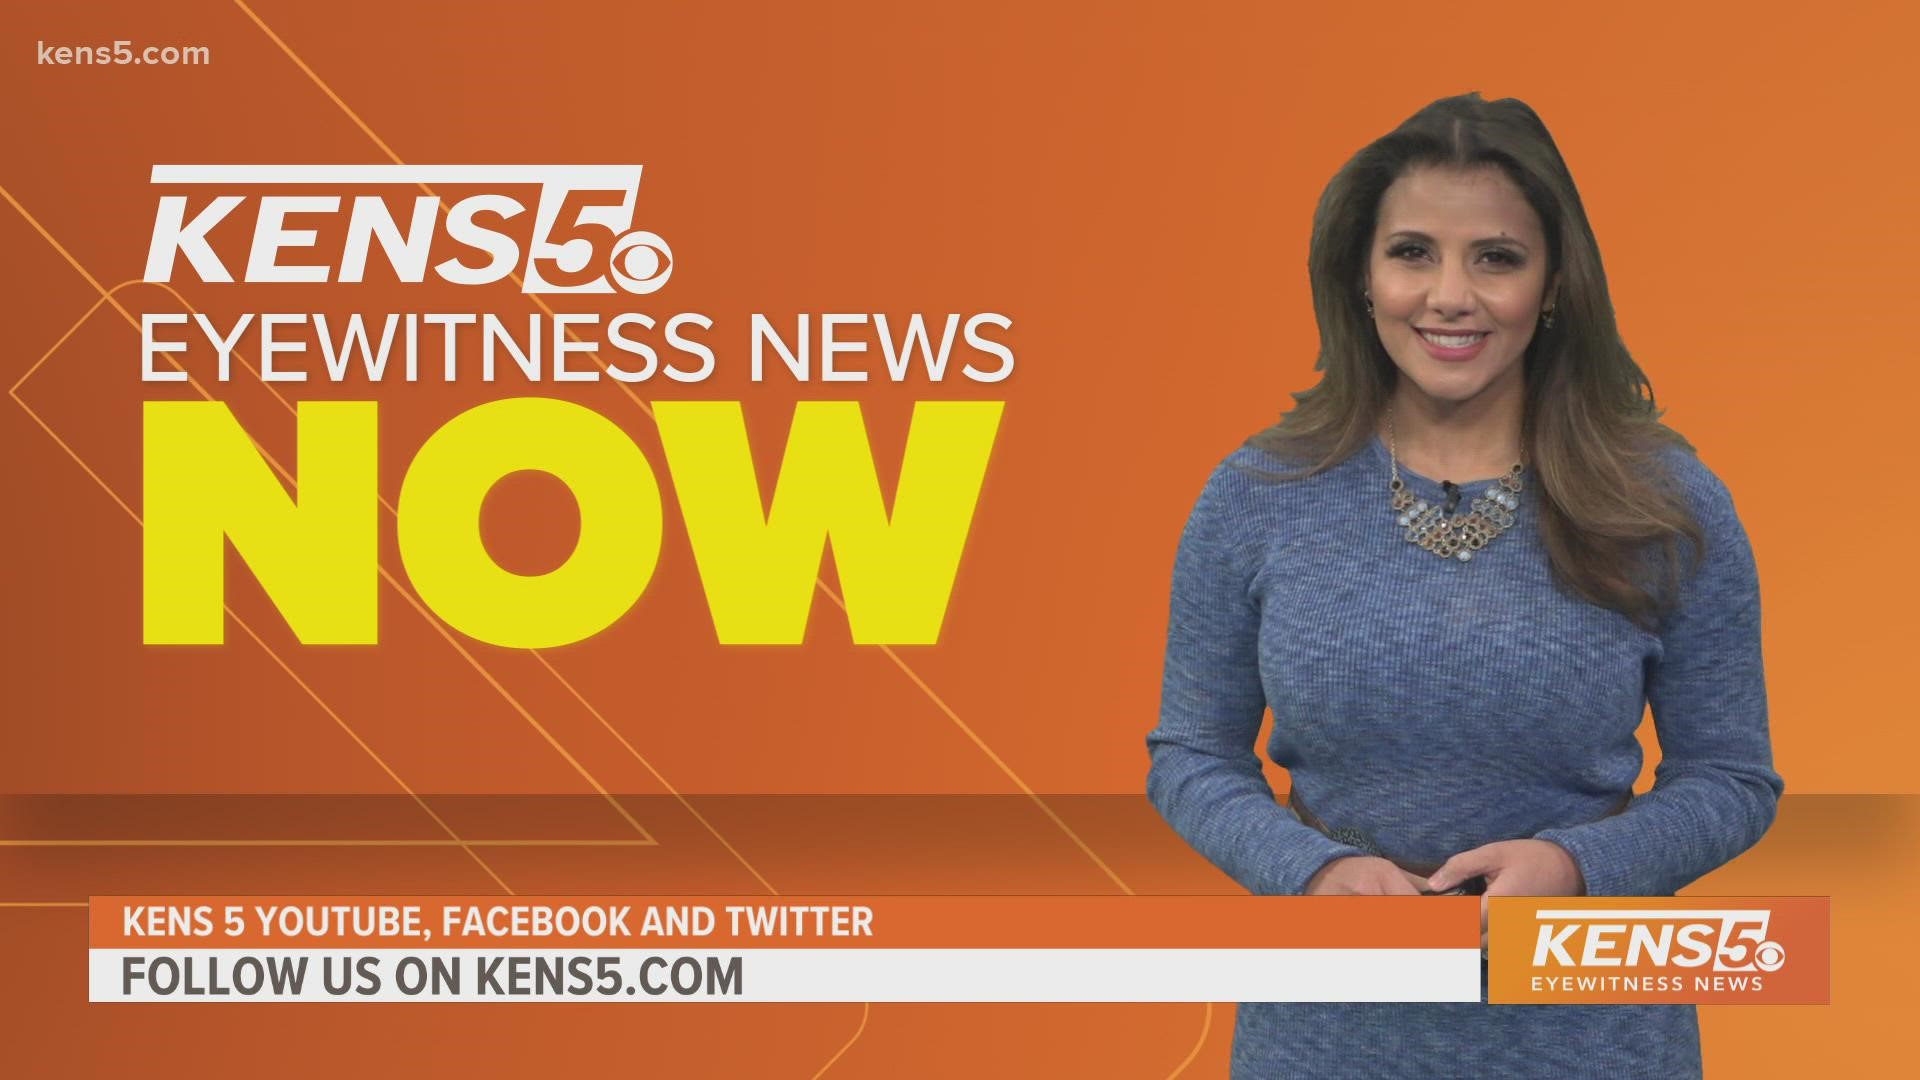 Follow us here to get the latest with KENS 5's Sarah Forgany every weekday.